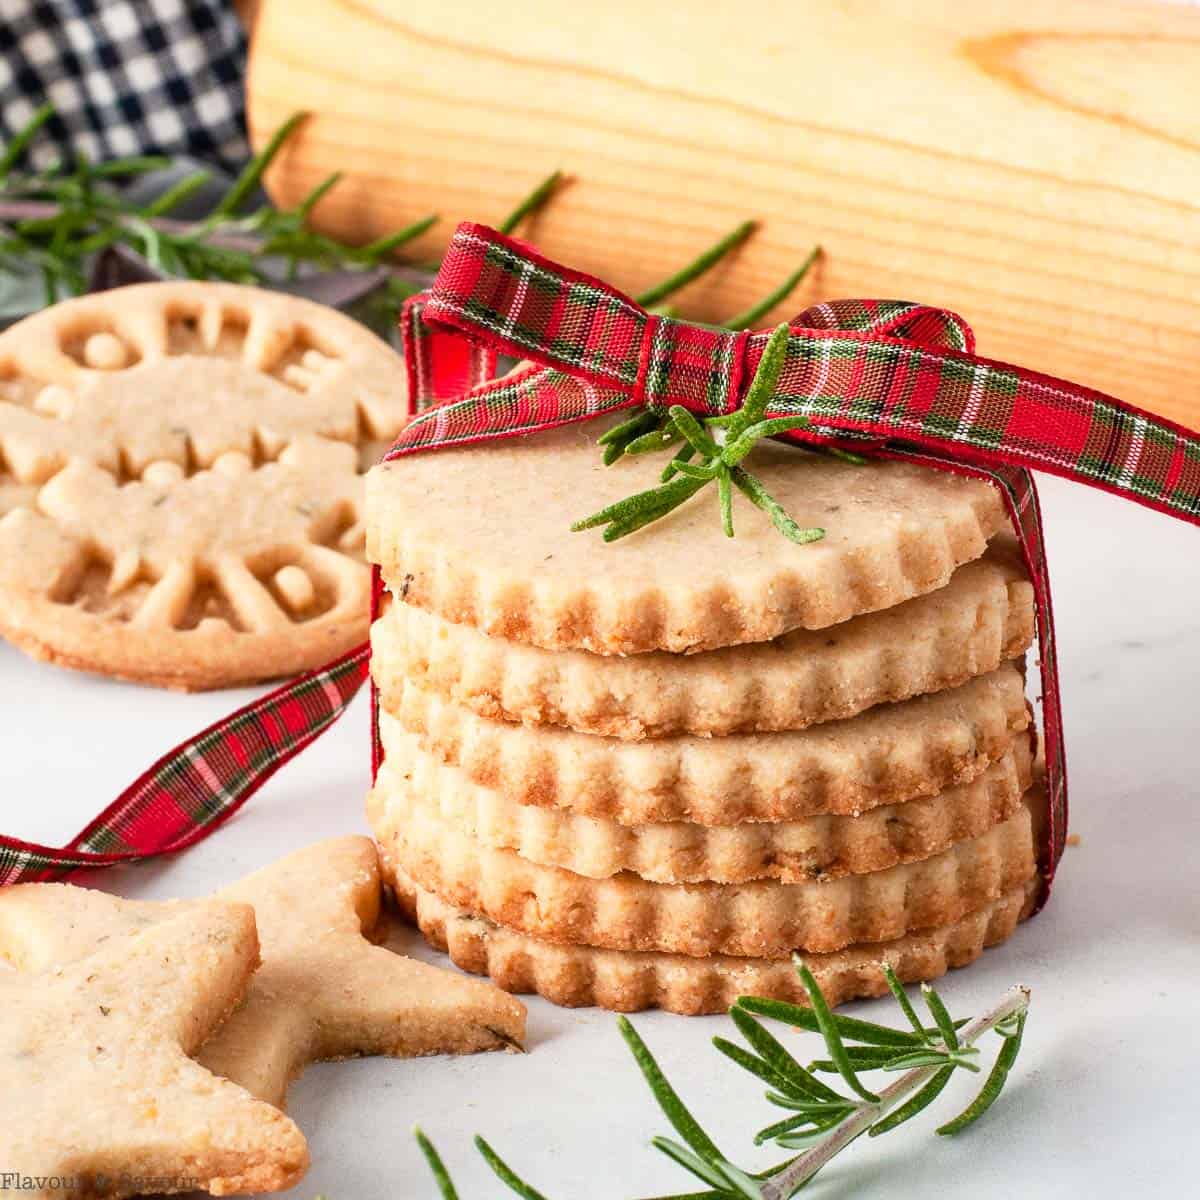 https://www.flavourandsavour.com/wp-content/uploads/2020/11/Rosemary-Shortbread-Cookies-stacked-square.jpg